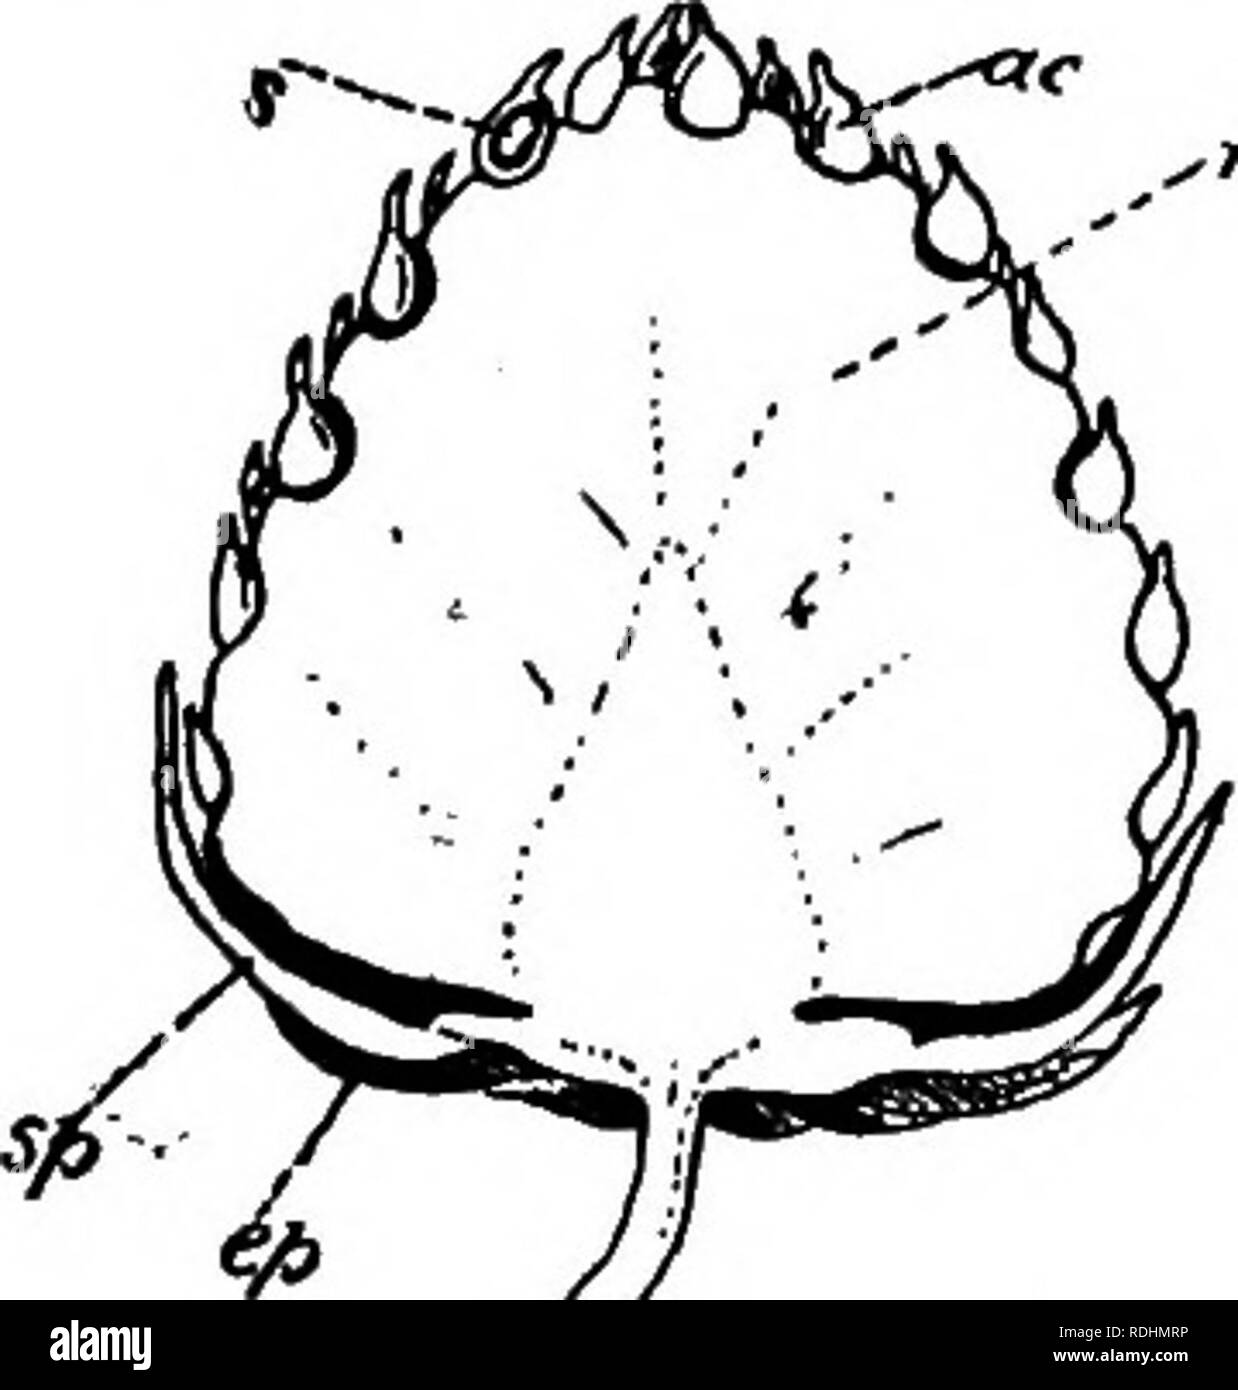 . Elementary botany . Botany. POLYPETAL^—ROSACEA 141 the receptacle. Each one-chambered ovary (fig. 169, ov) contains one ovule {o), and is surmounted by a single style {st), which emerges through the mouth of the receptacular tube and bears a simple stigma {sg). Fruit (fig. 170) compound, con- sisting of numerous achenes concealed in the red hollowed receptacle, which bears a persistent calyx. (Each achene is, of course, developed from one of the separate carpels.) Seeds having no endosperm. Dissemination.—The achenes are scattered by the agency of birds, which peck at the red receptacle and  Stock Photo